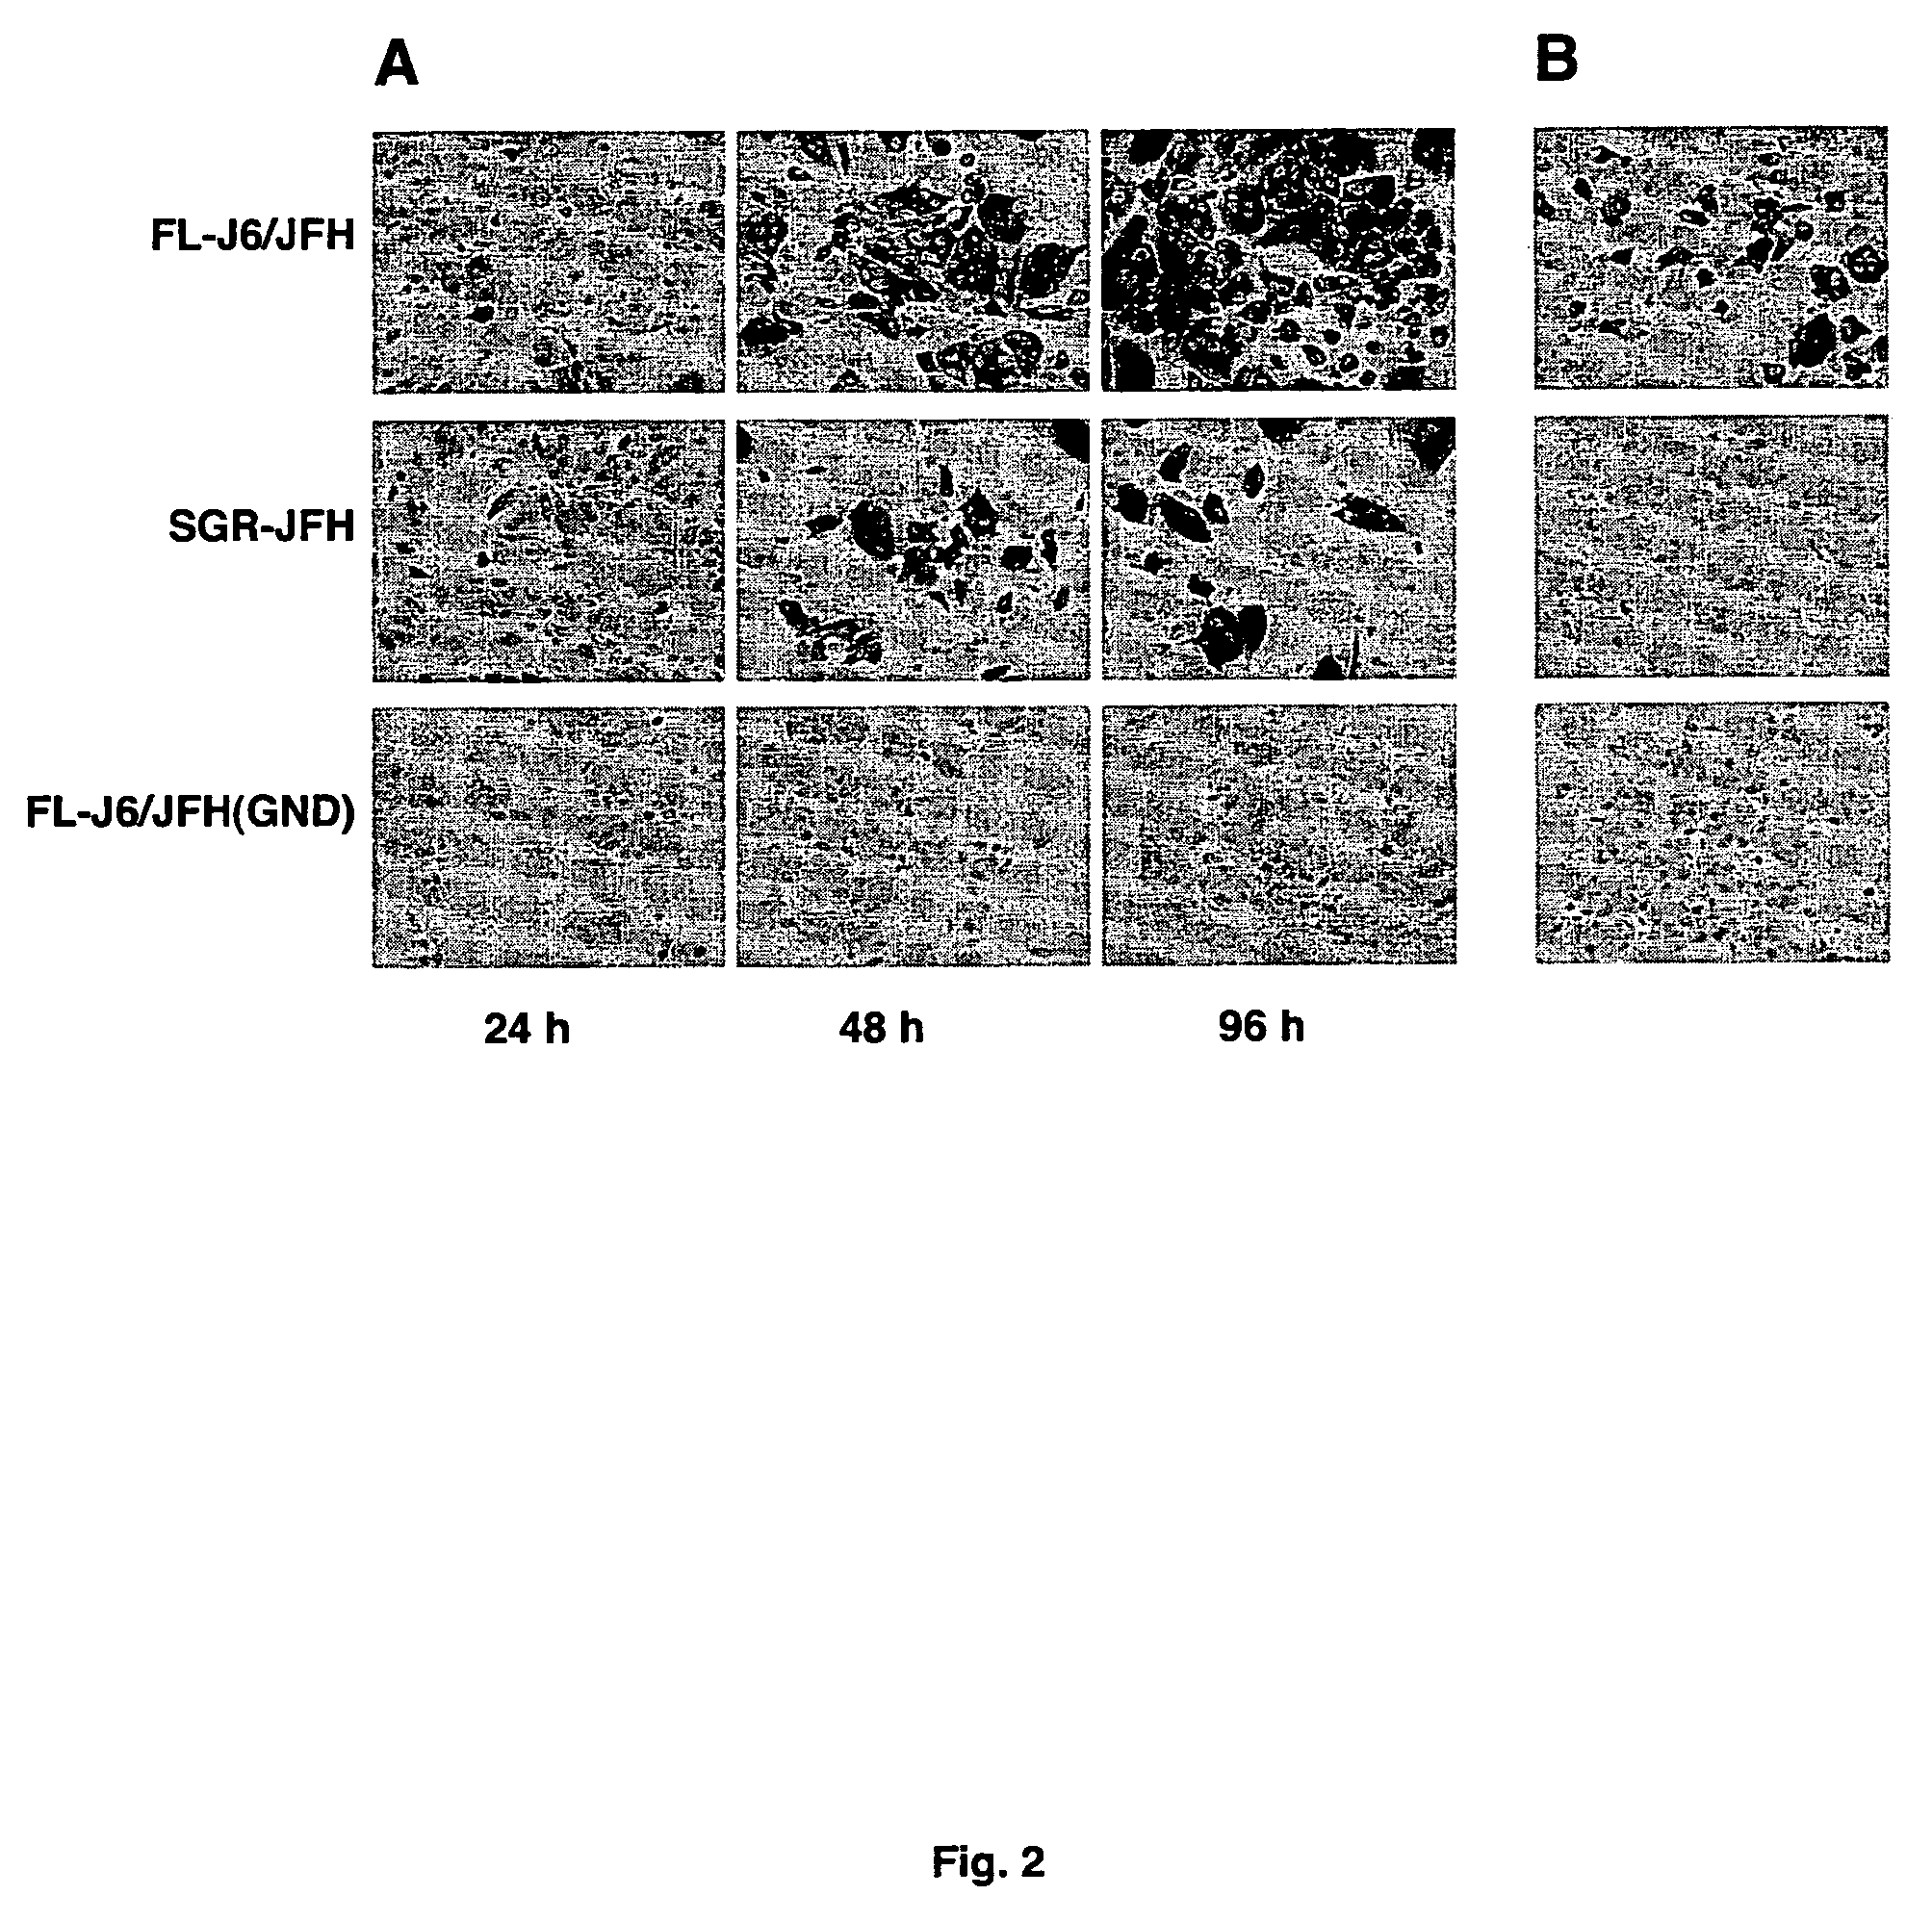 Infectious, chimeric hepatitis C virus, methods of producing the same and methods of use thereof